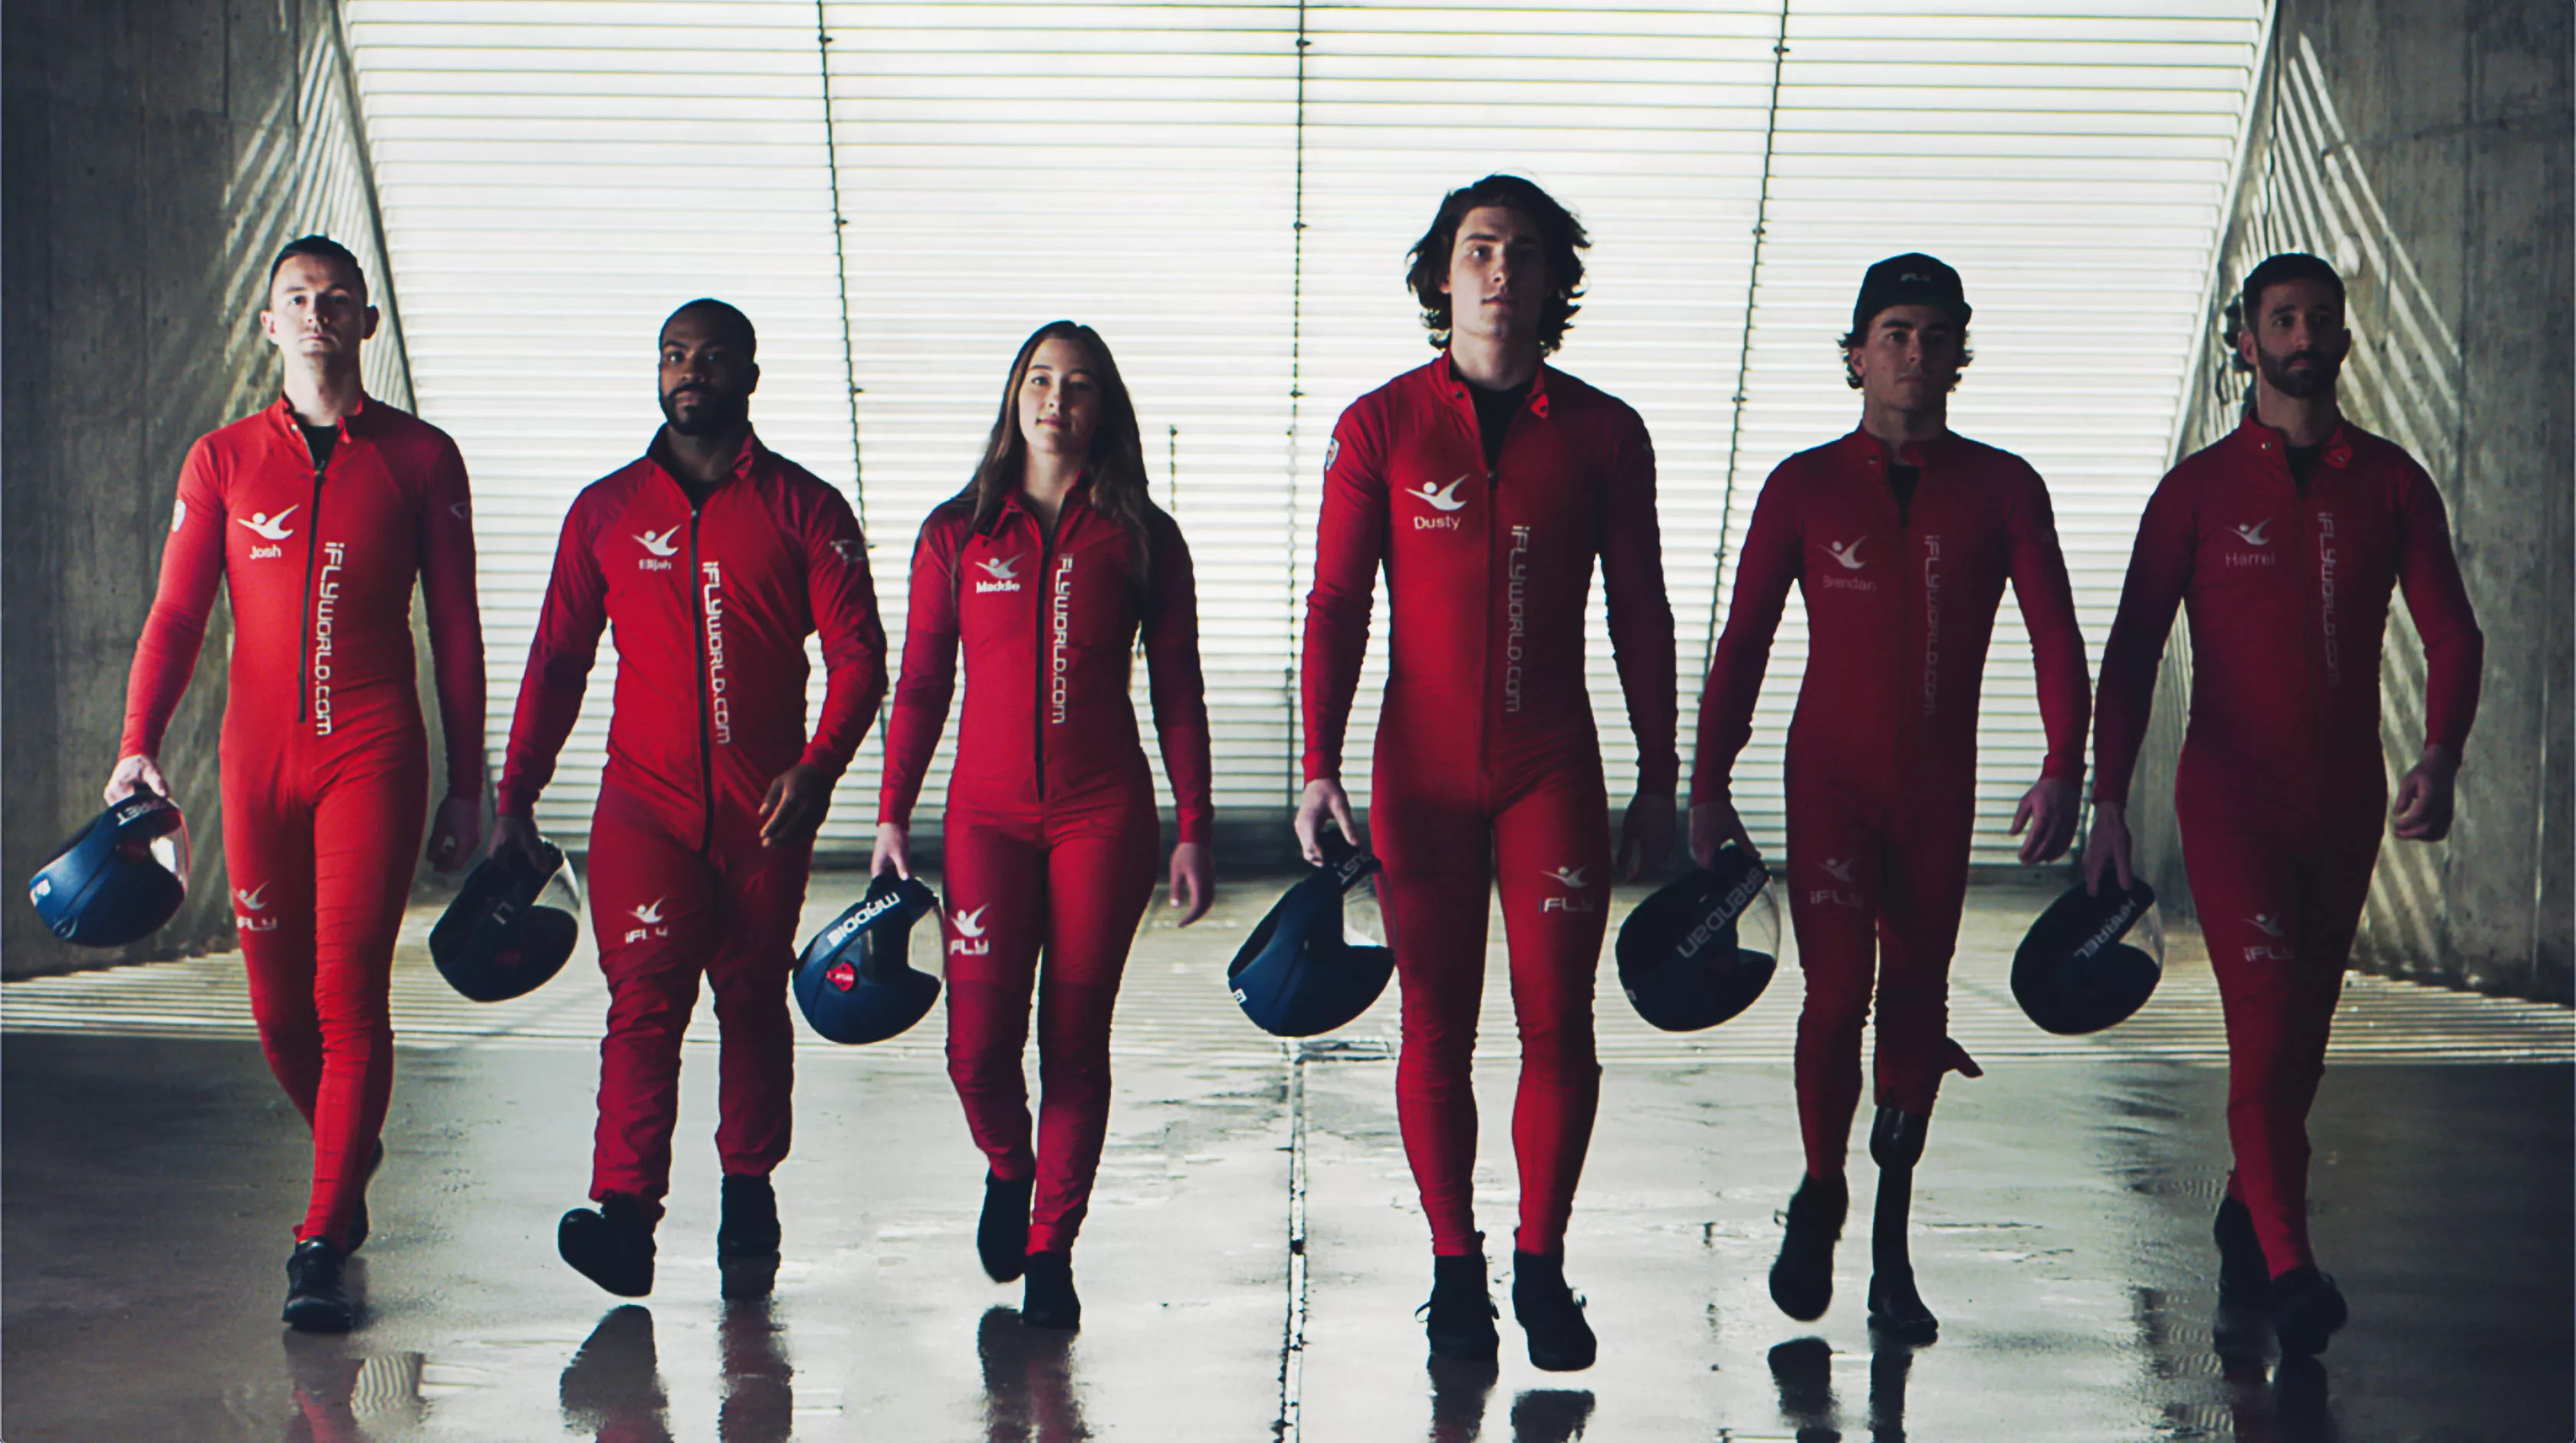 Six young adults walking in a line wearing red iFLY skydiving suits and holding blue helmets